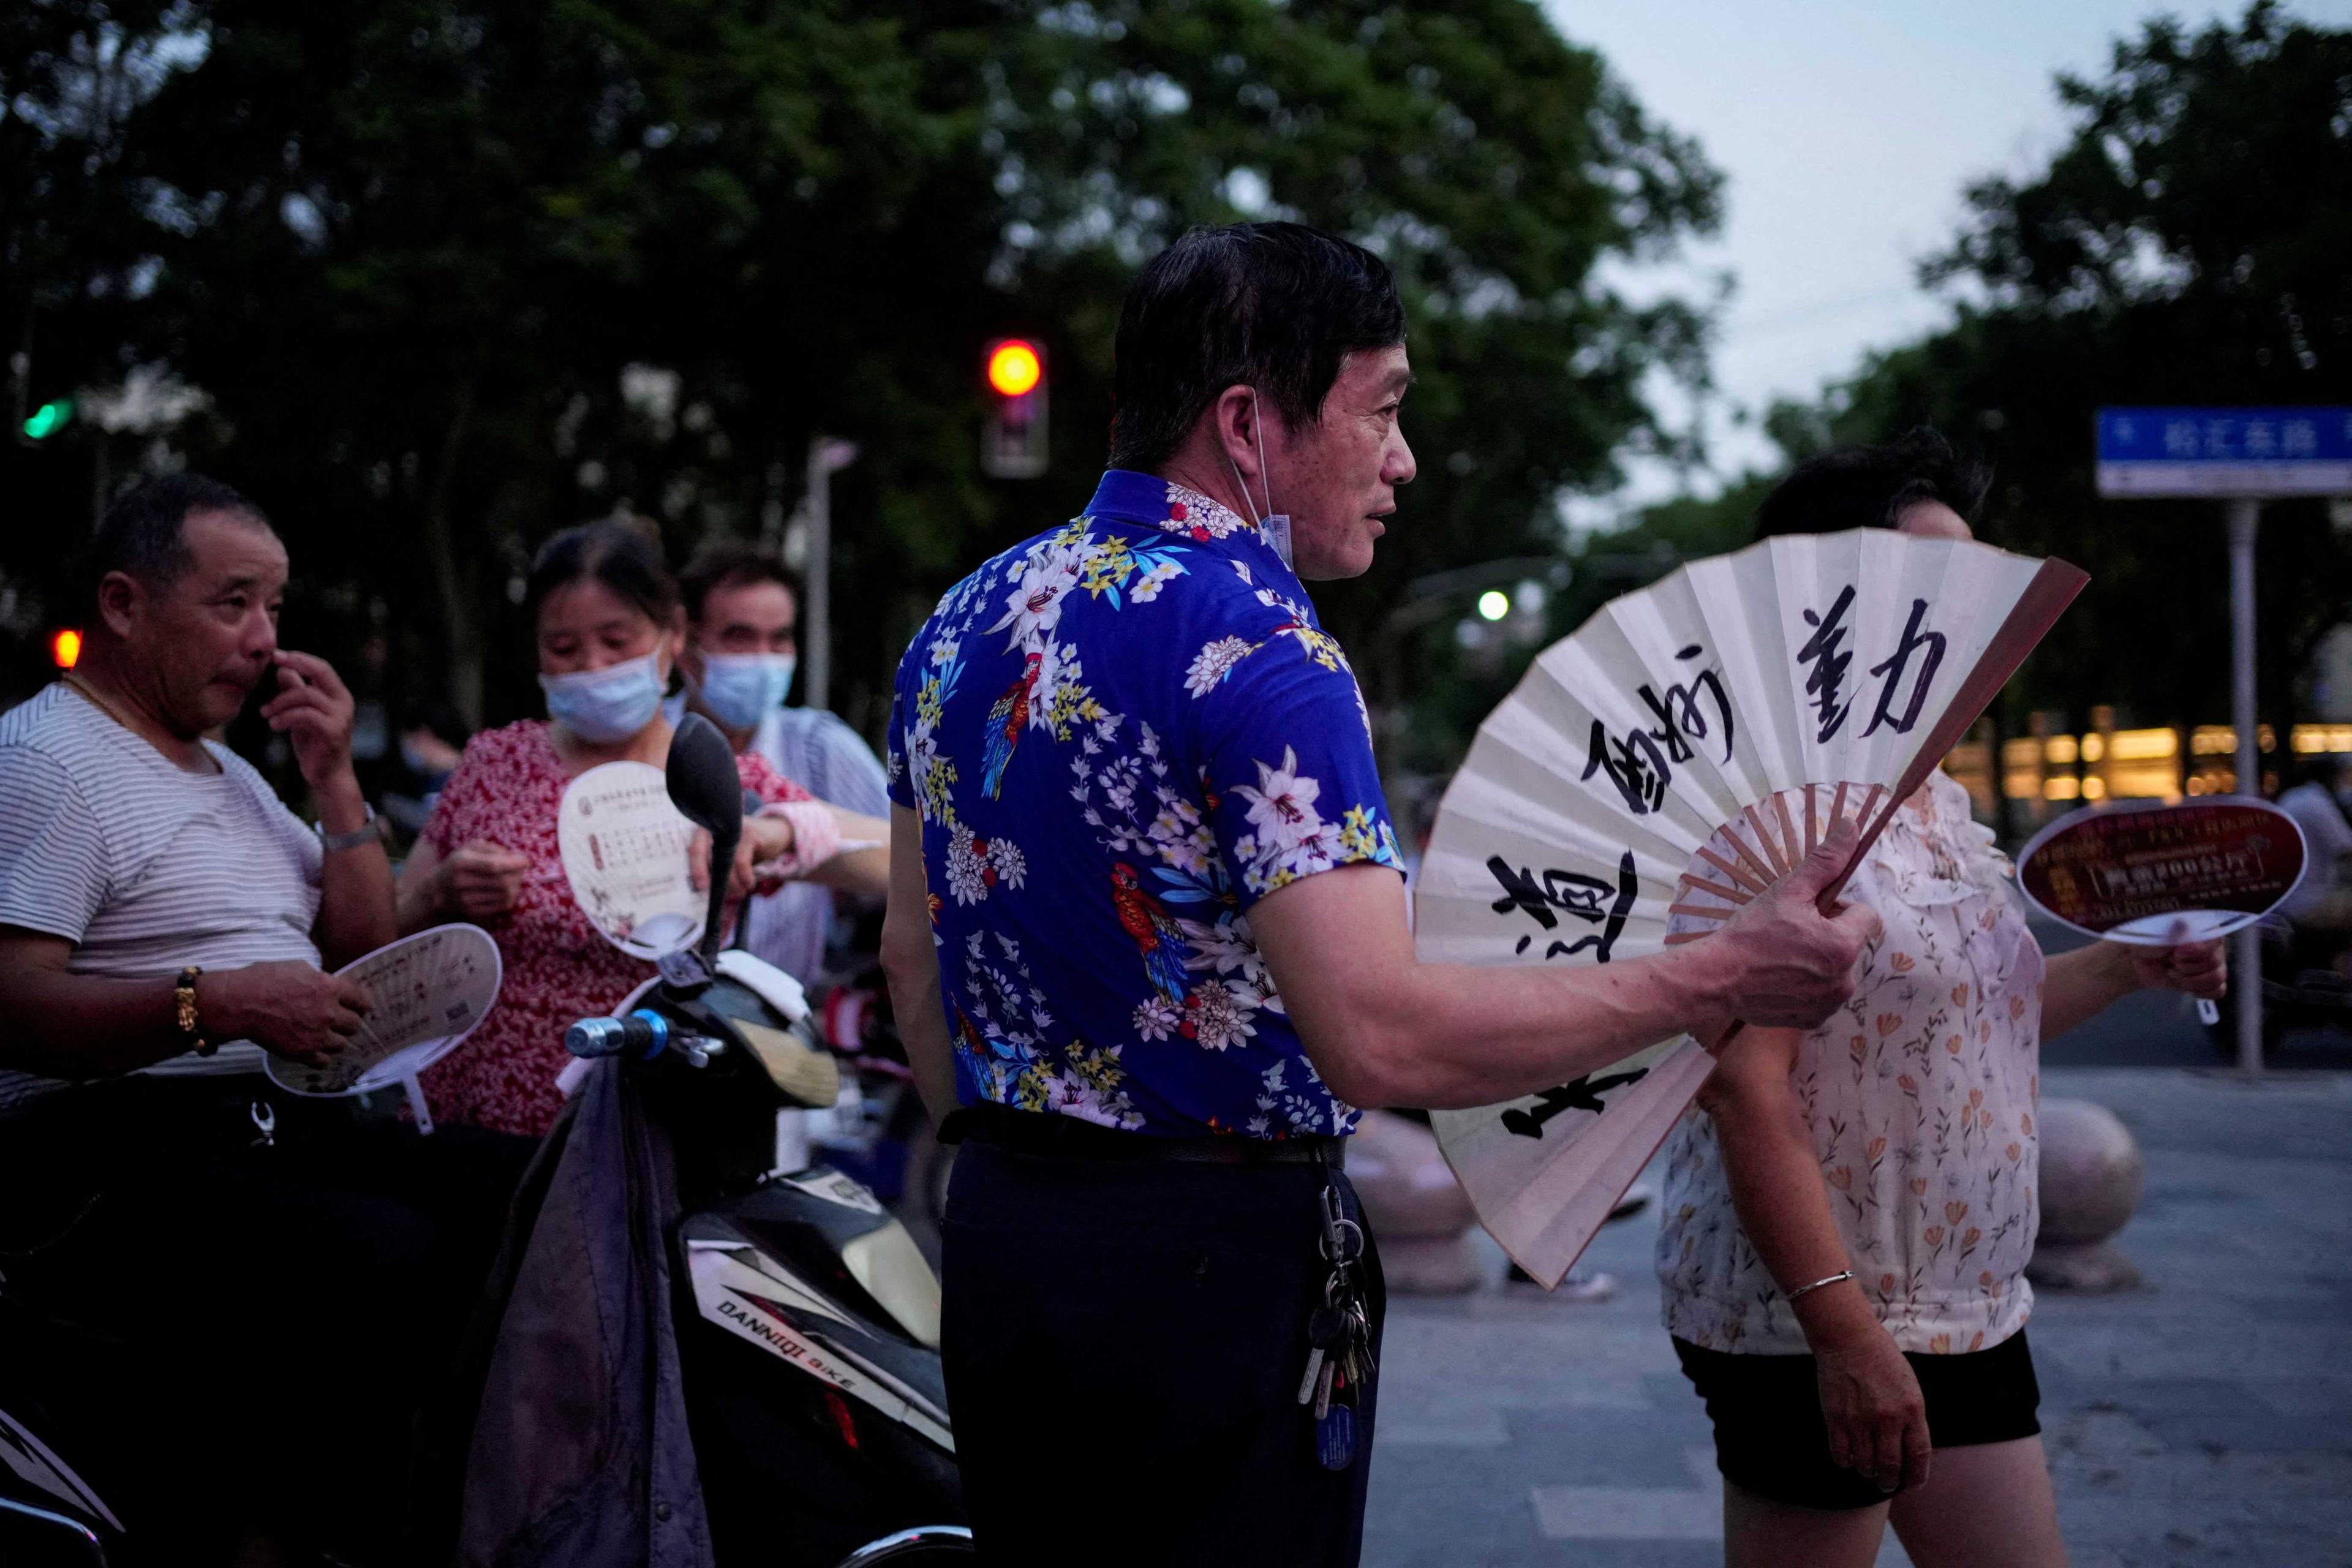 People use fans as they gather in a park amid a heatwave warning in Shanghai, China July 23, 2022. Photo: Reuters